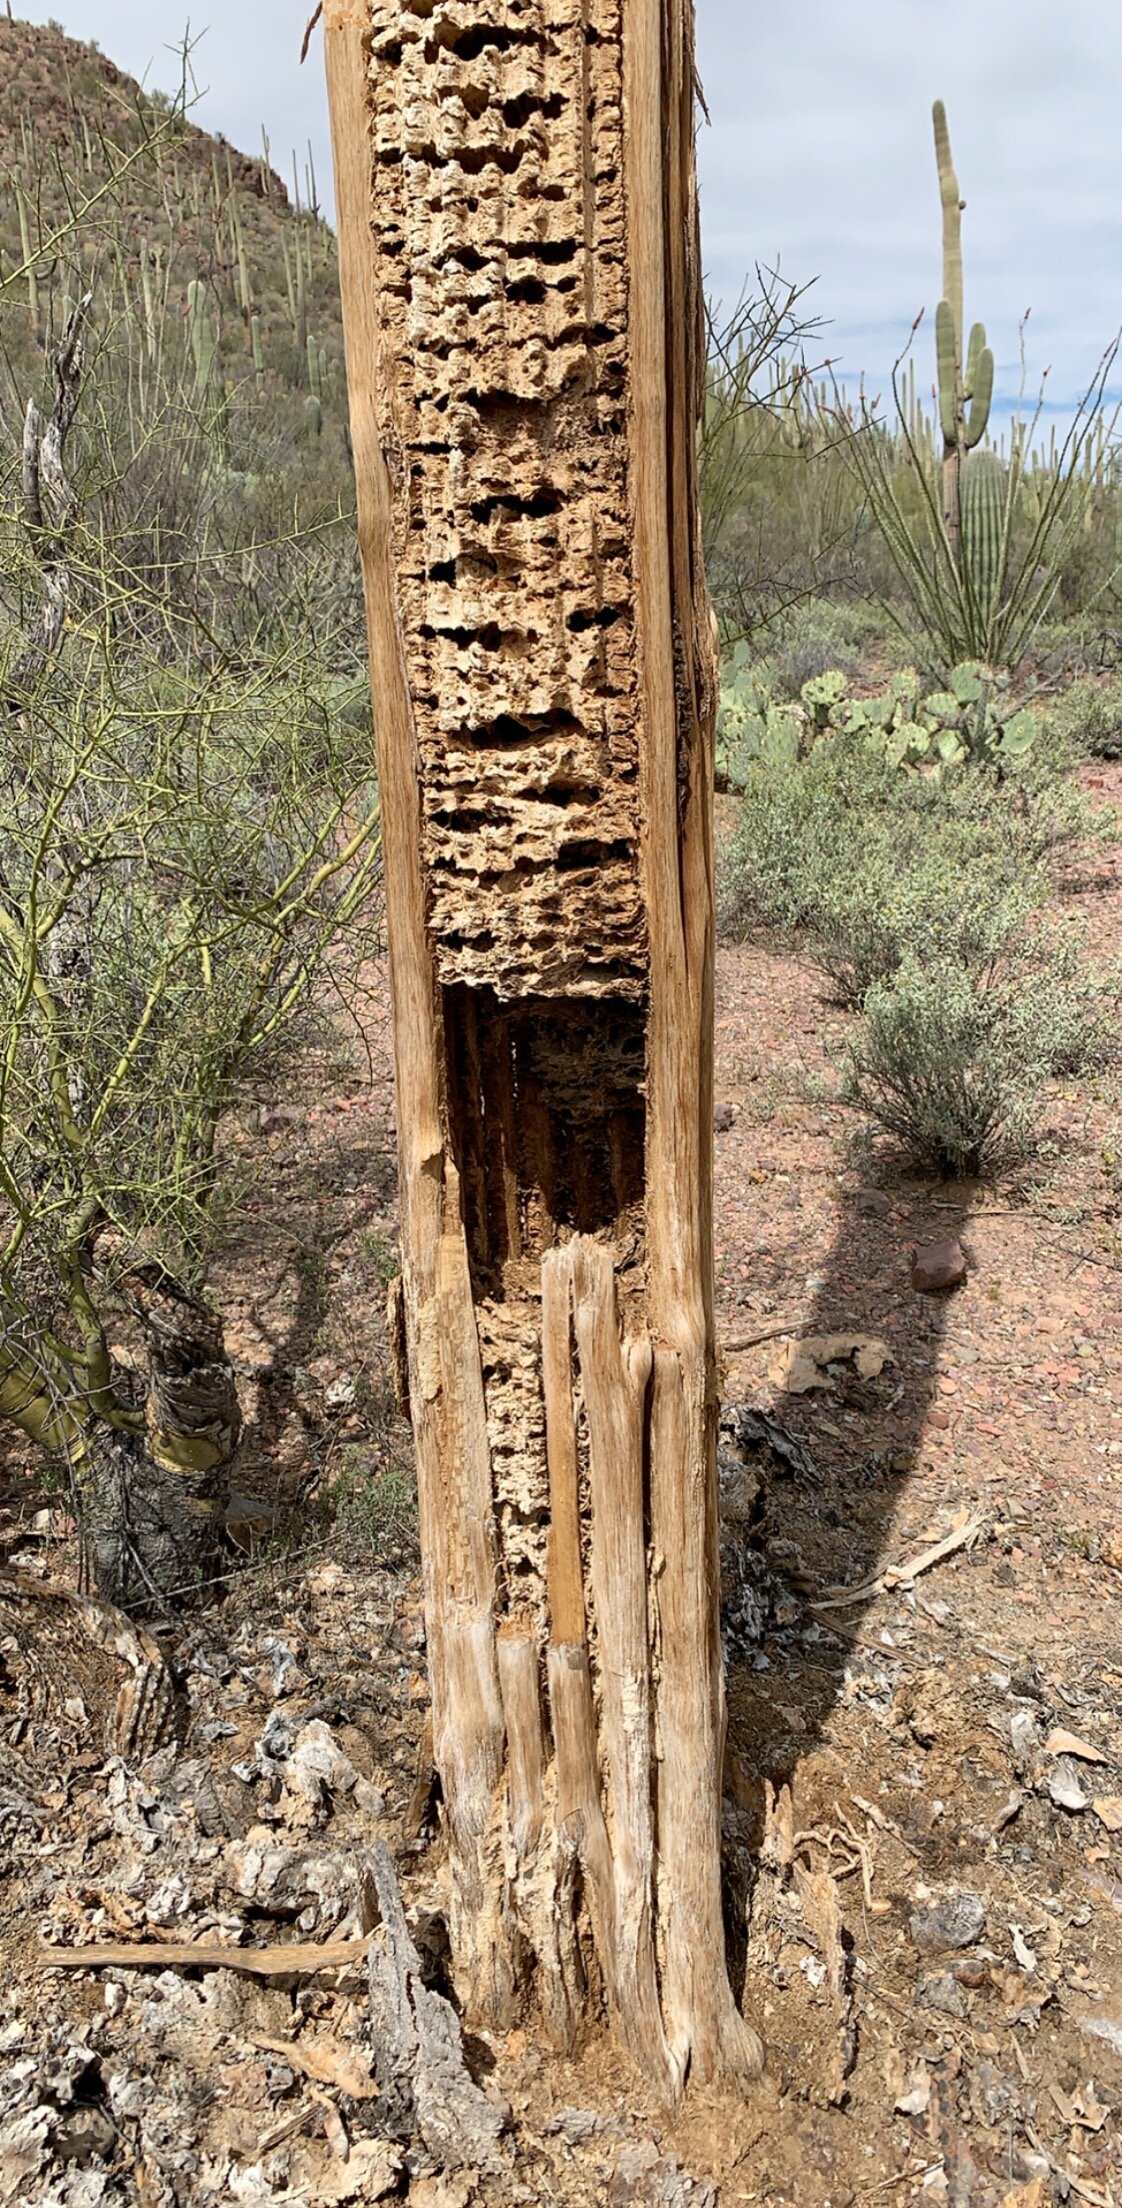  To answer your question of what ‘s inside the Saguaro and how such a large size and weight can be supported. 😊 